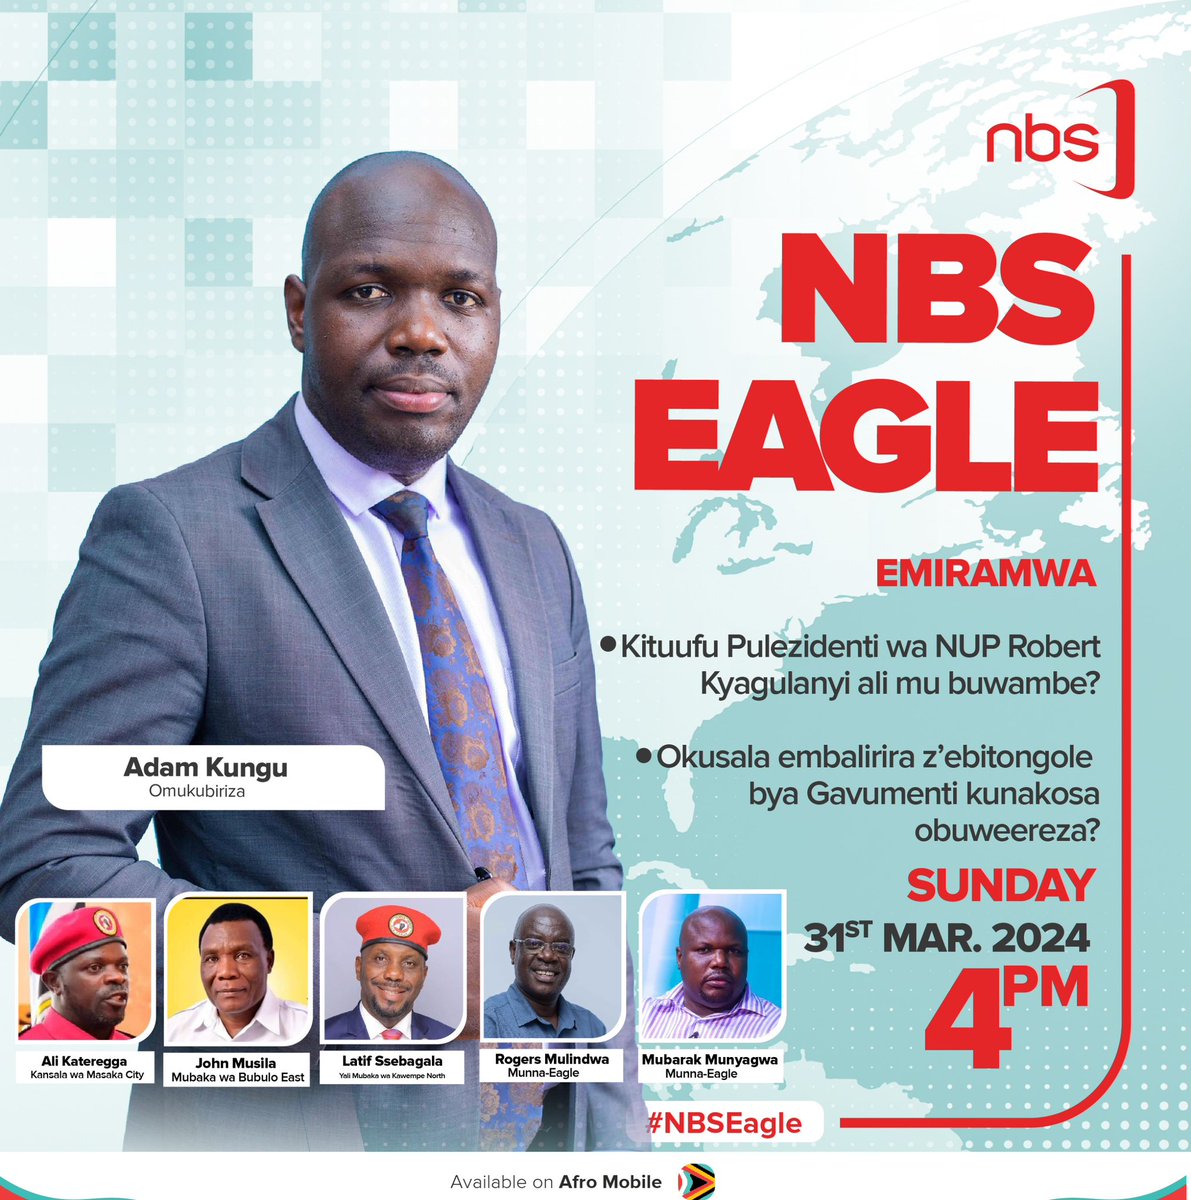 Could the NUP President Robert Kyagulanyi Ssentamu be under siege? Share your views ahead of #NBSEagle with @adam_kungu. Don't miss the show as the panelists discuss this and more starting at 4 PM. #NBSUpdates